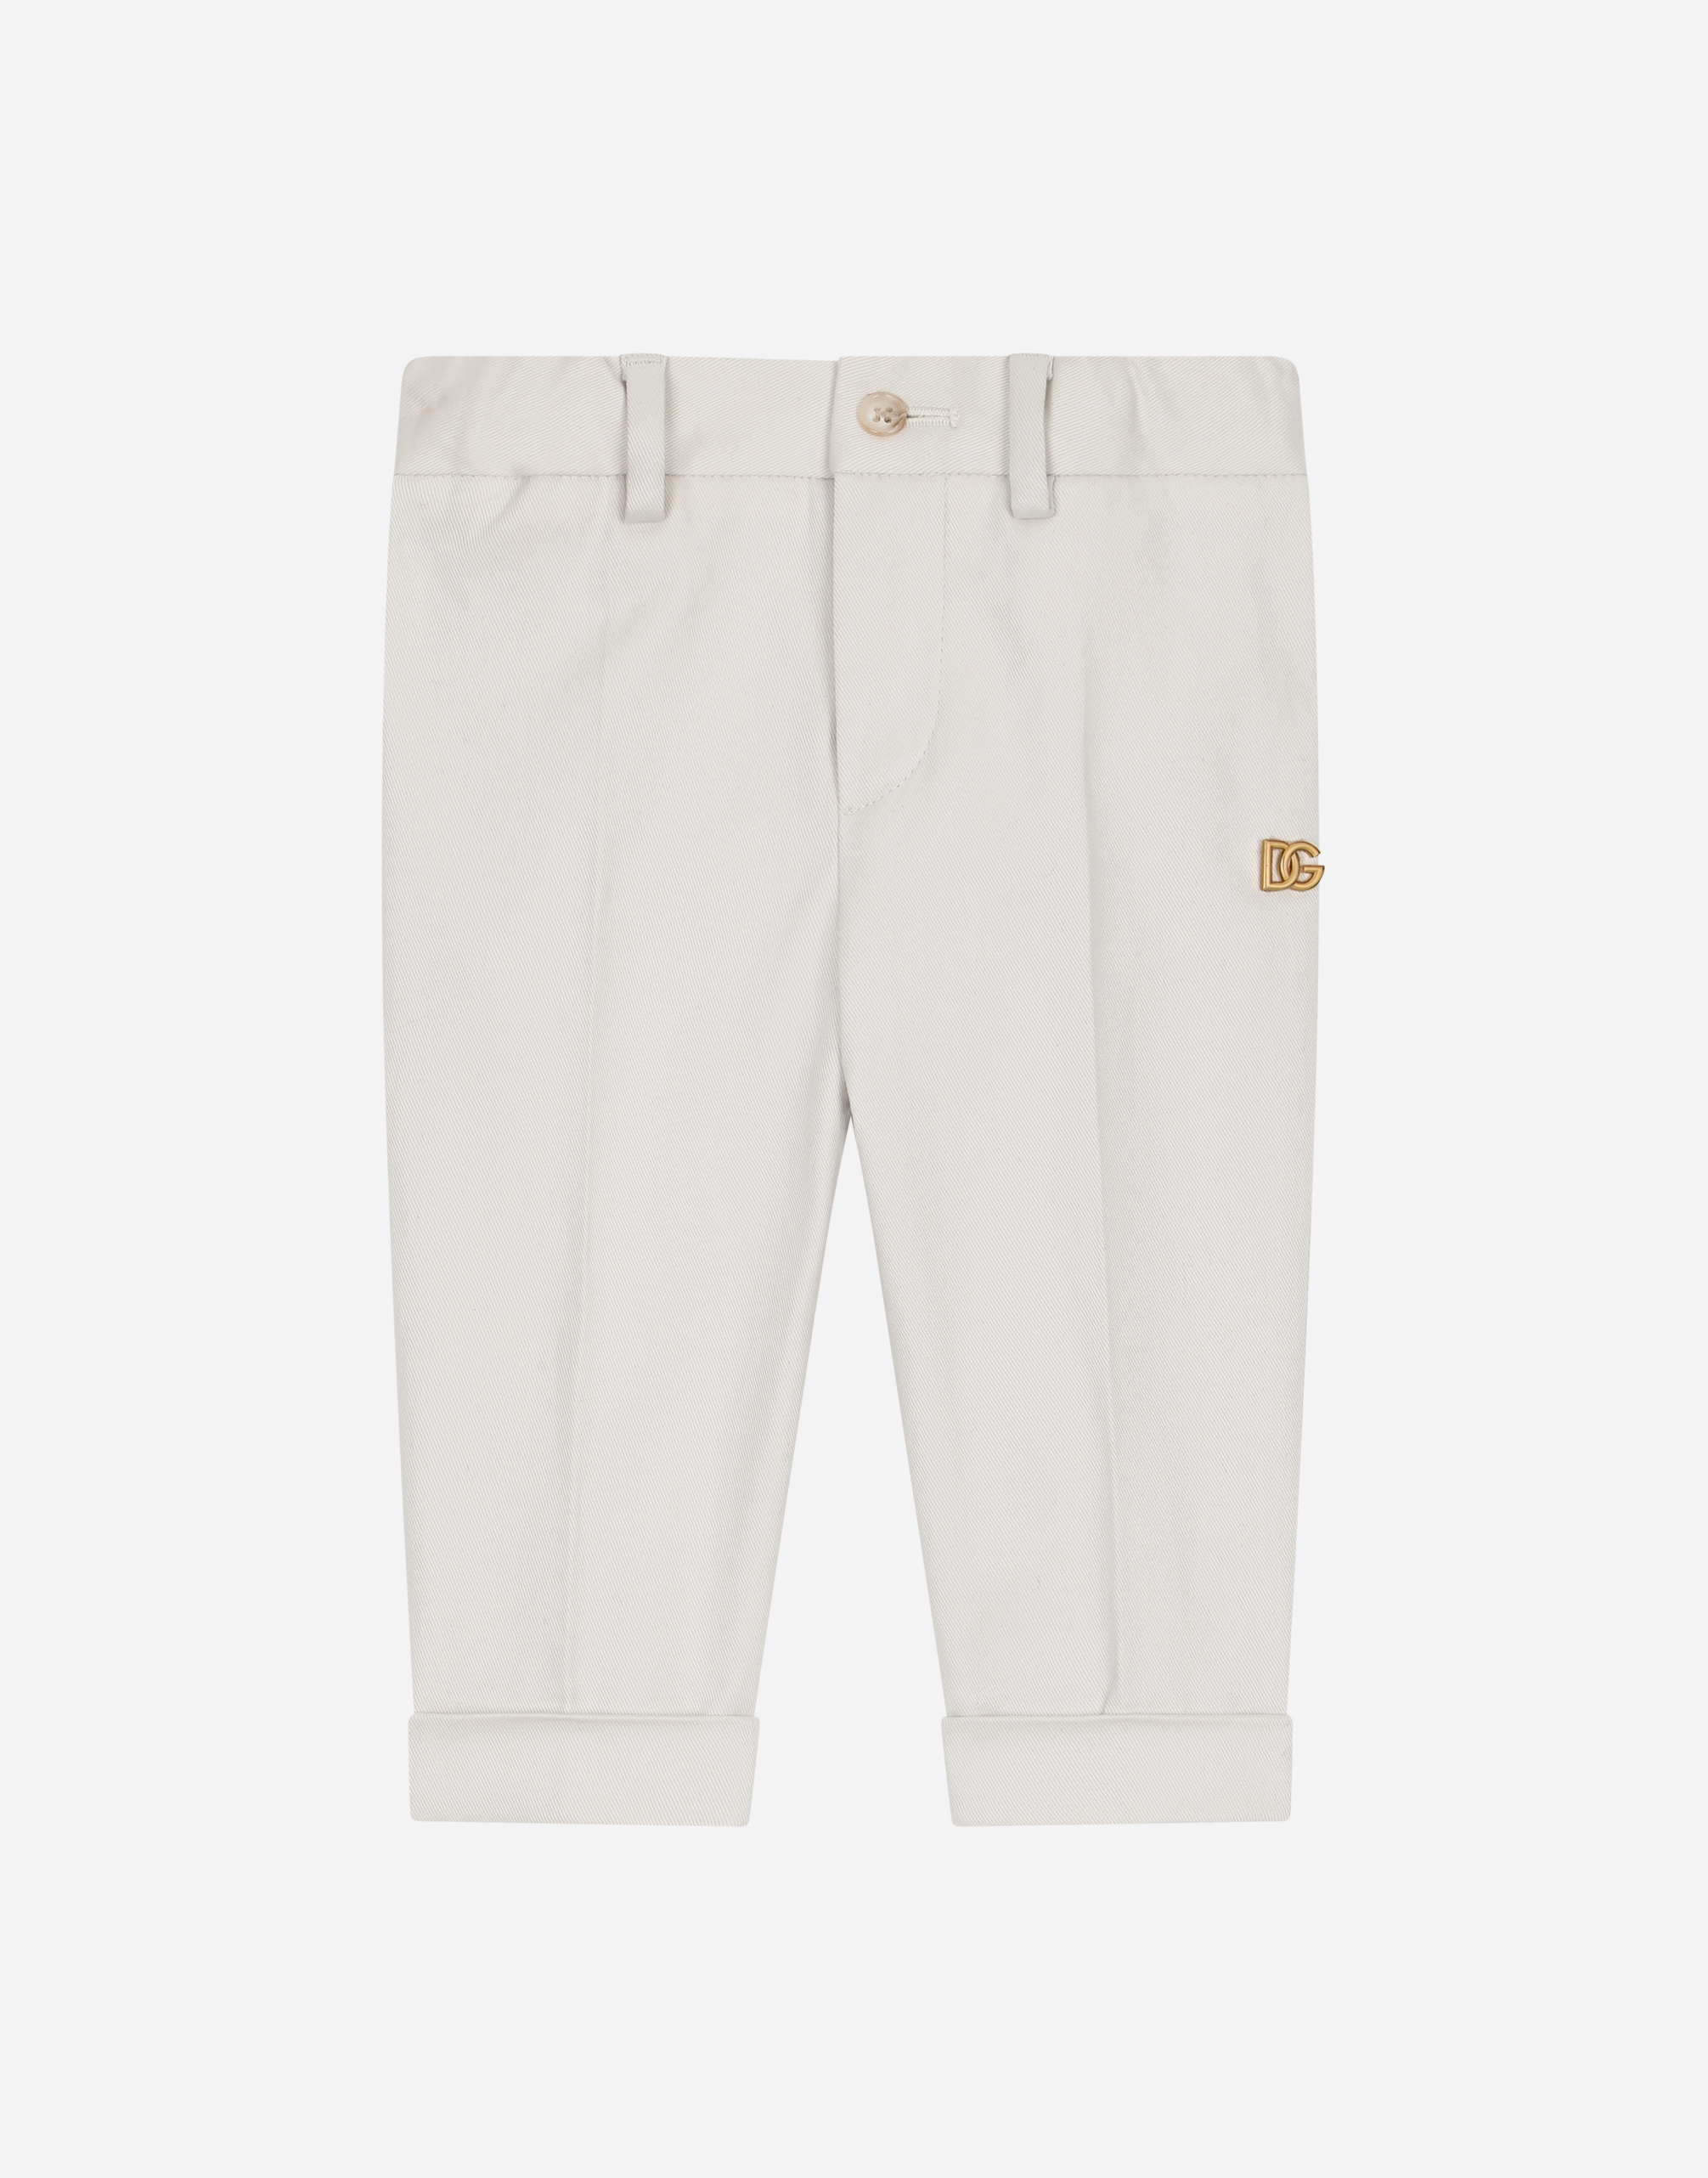 Drill pants with DG logo in Grey